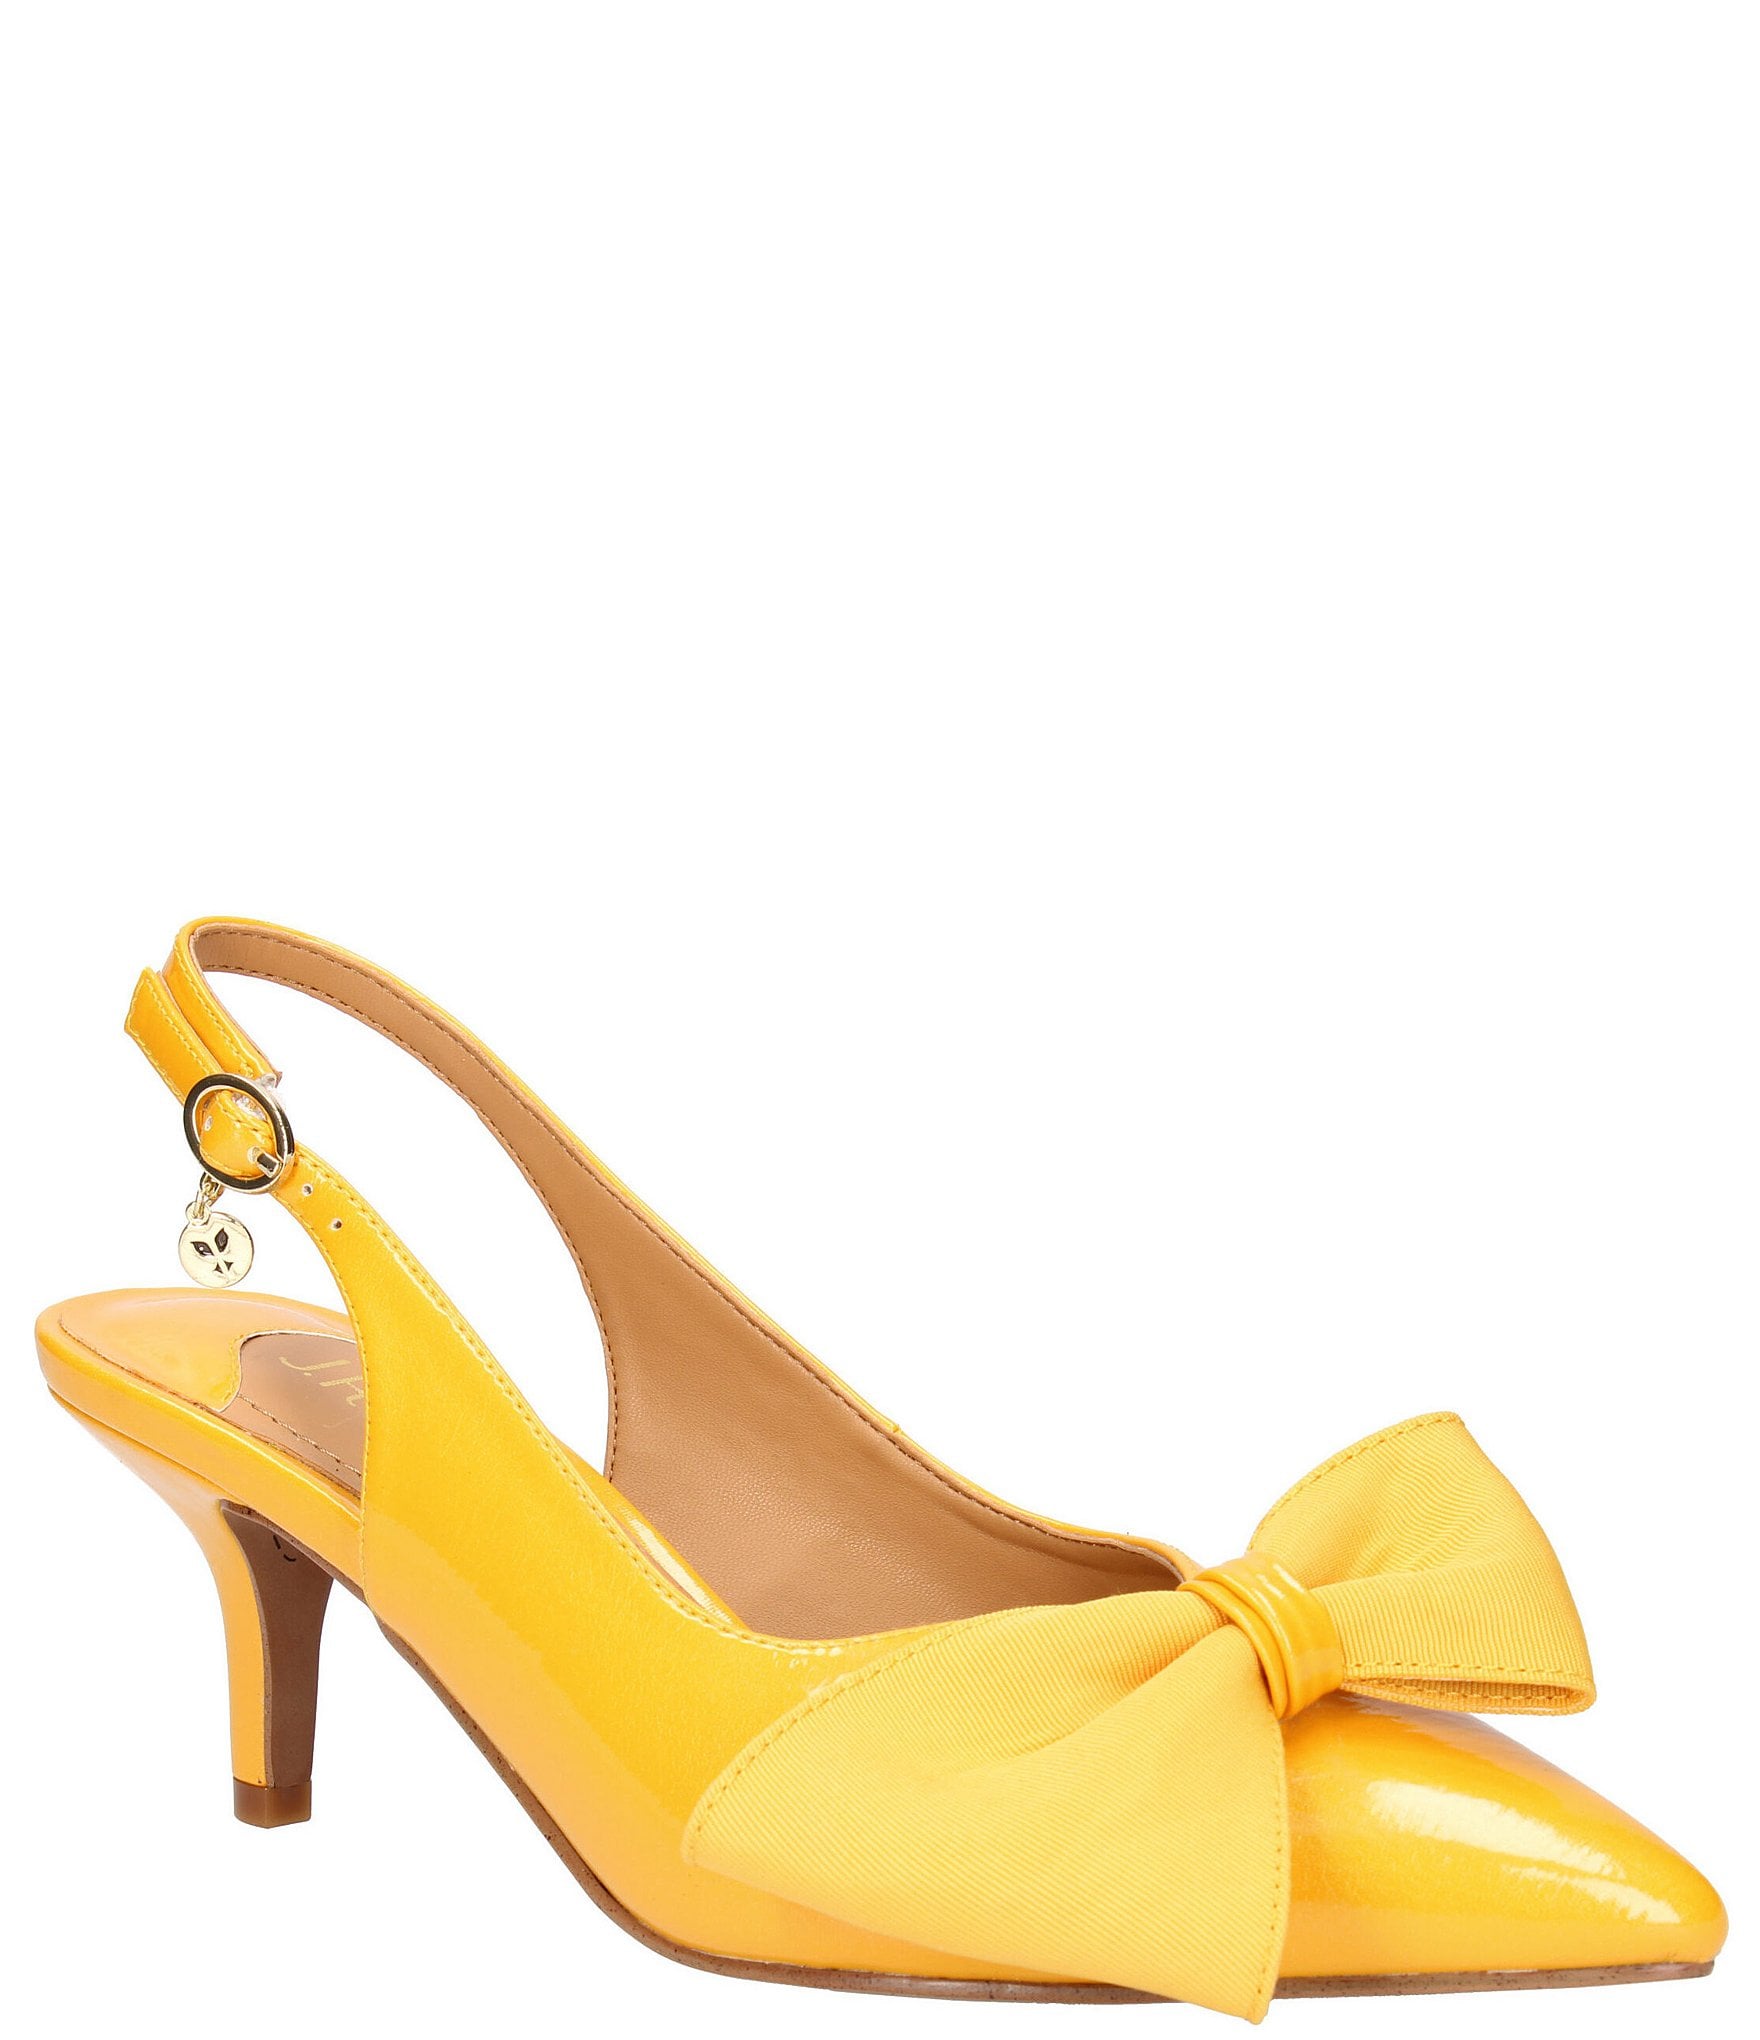 Yellow Slingback Heels with Asymmetric Bow